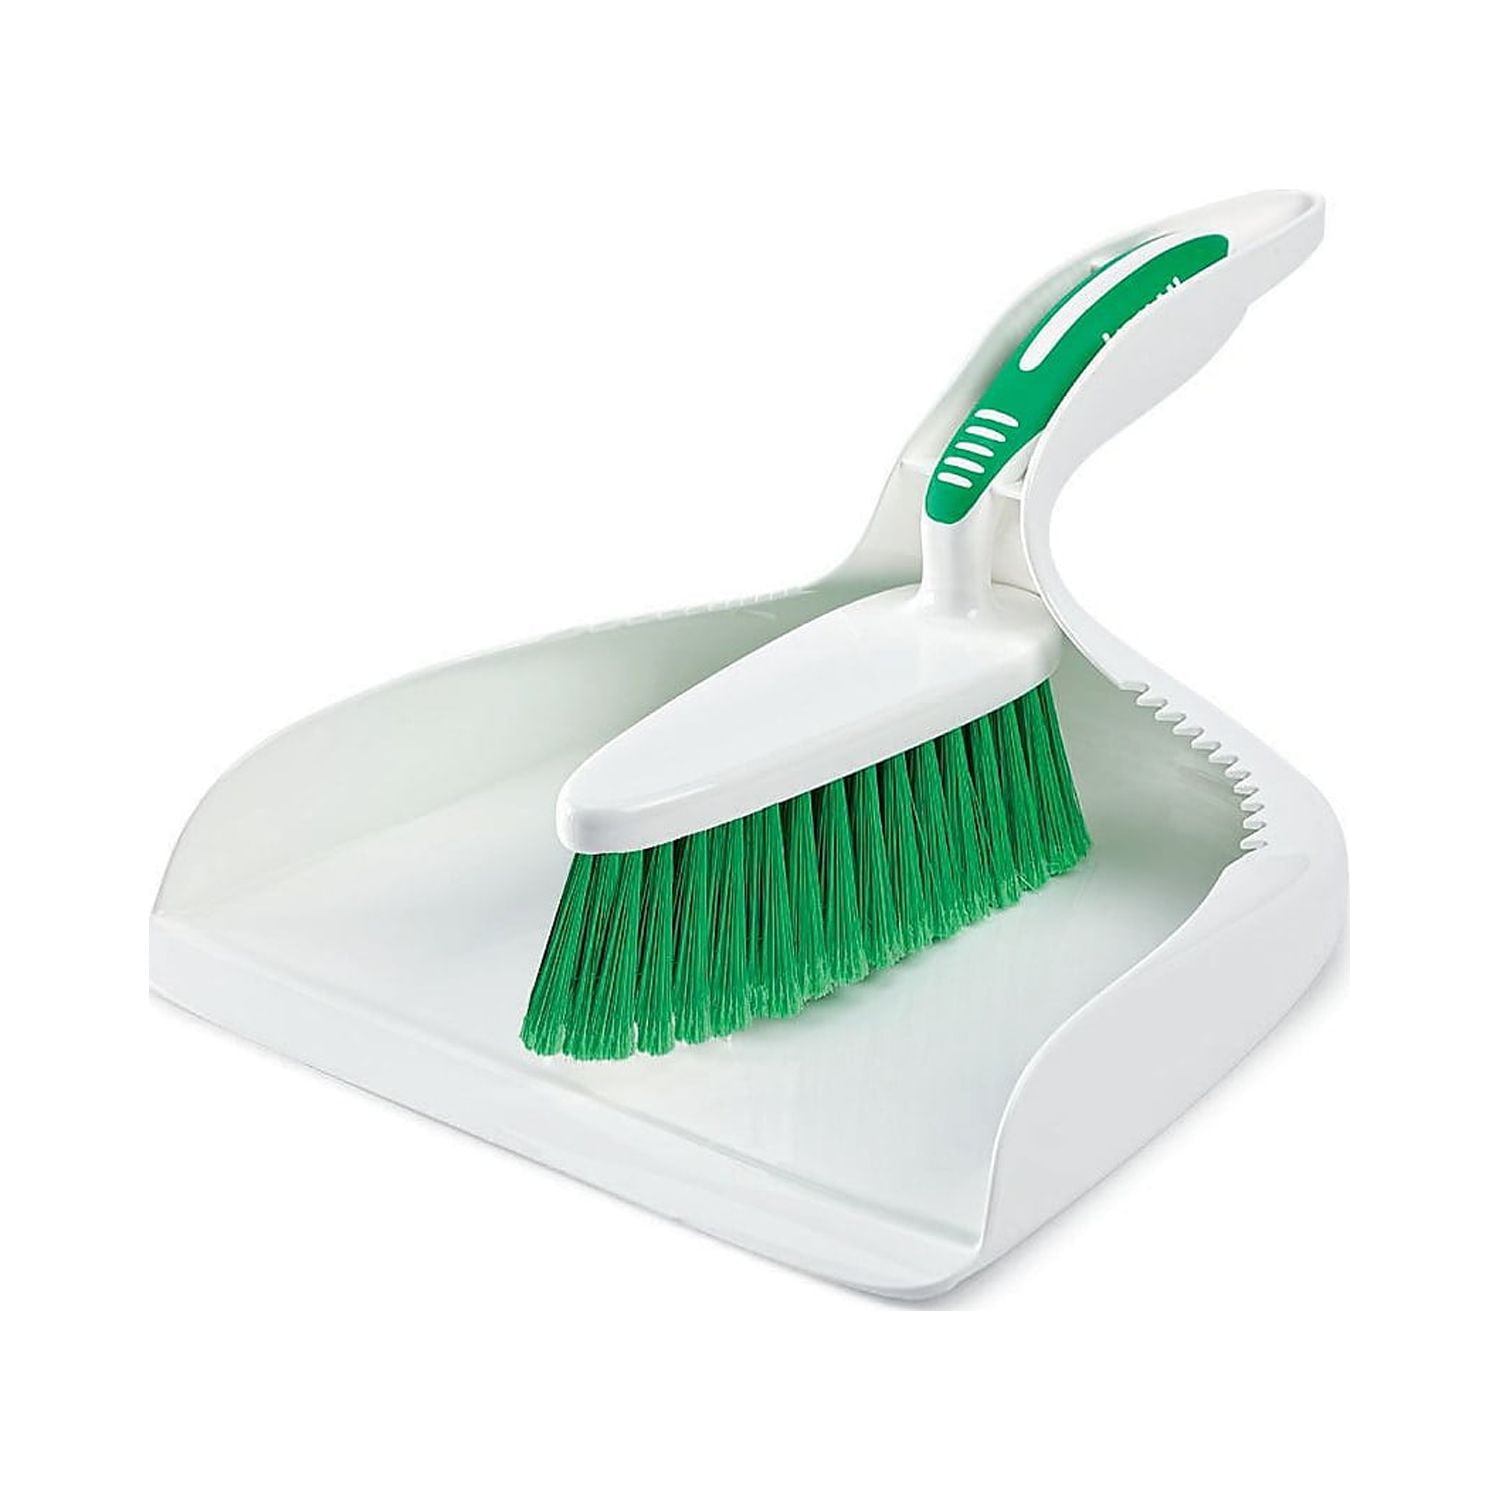 Libman® Dishmatic® Refillable Dish Wand Dishes Scrubber, 1 ct